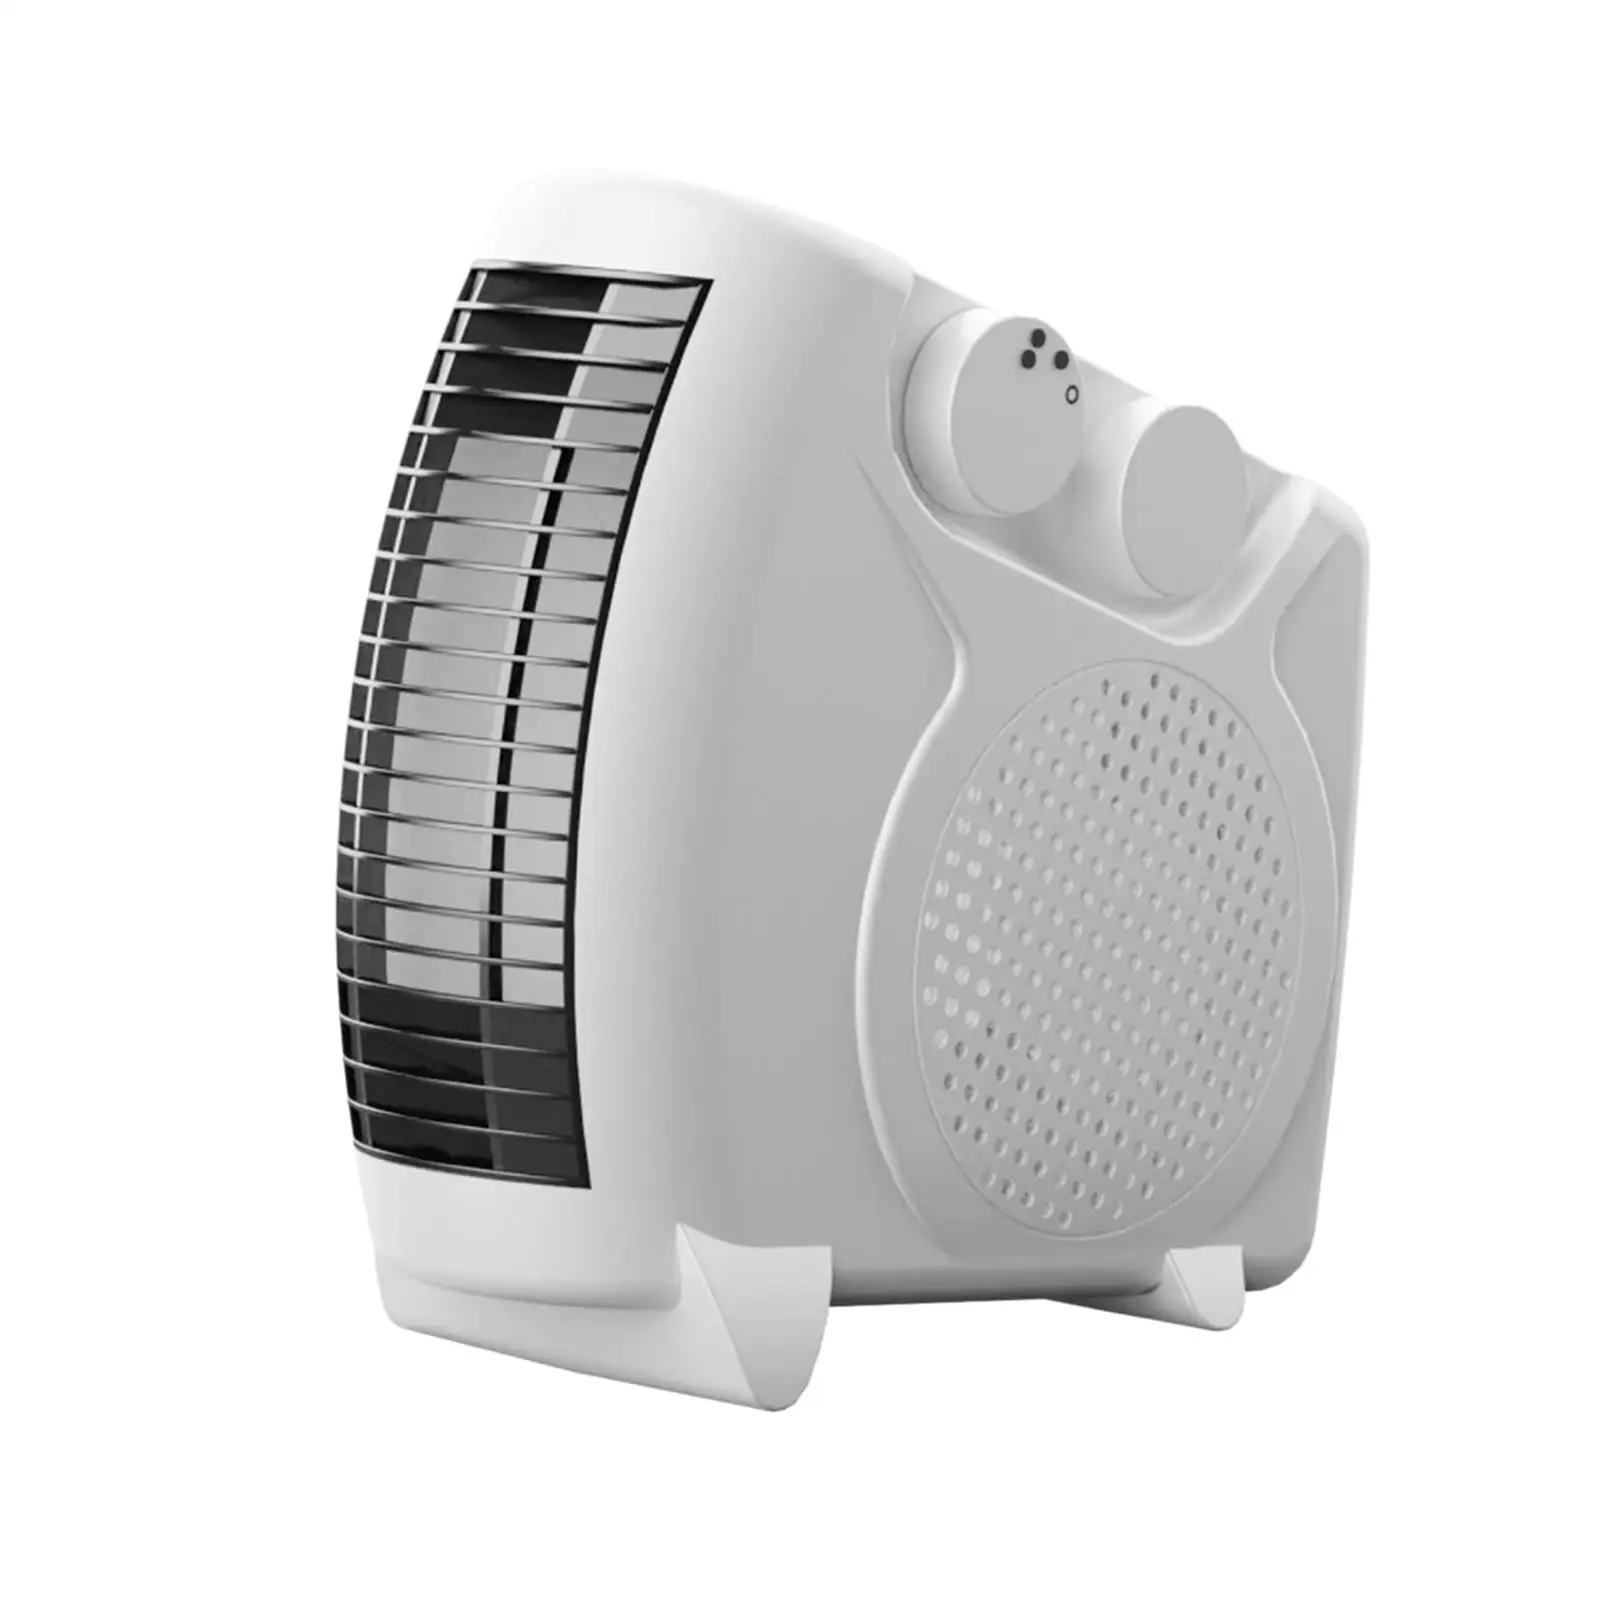 Electric Desktop Space Heater 1200W Compact Size Auto Off Protection Office Heater Household Fan Heater for Bedroom Multipurpose